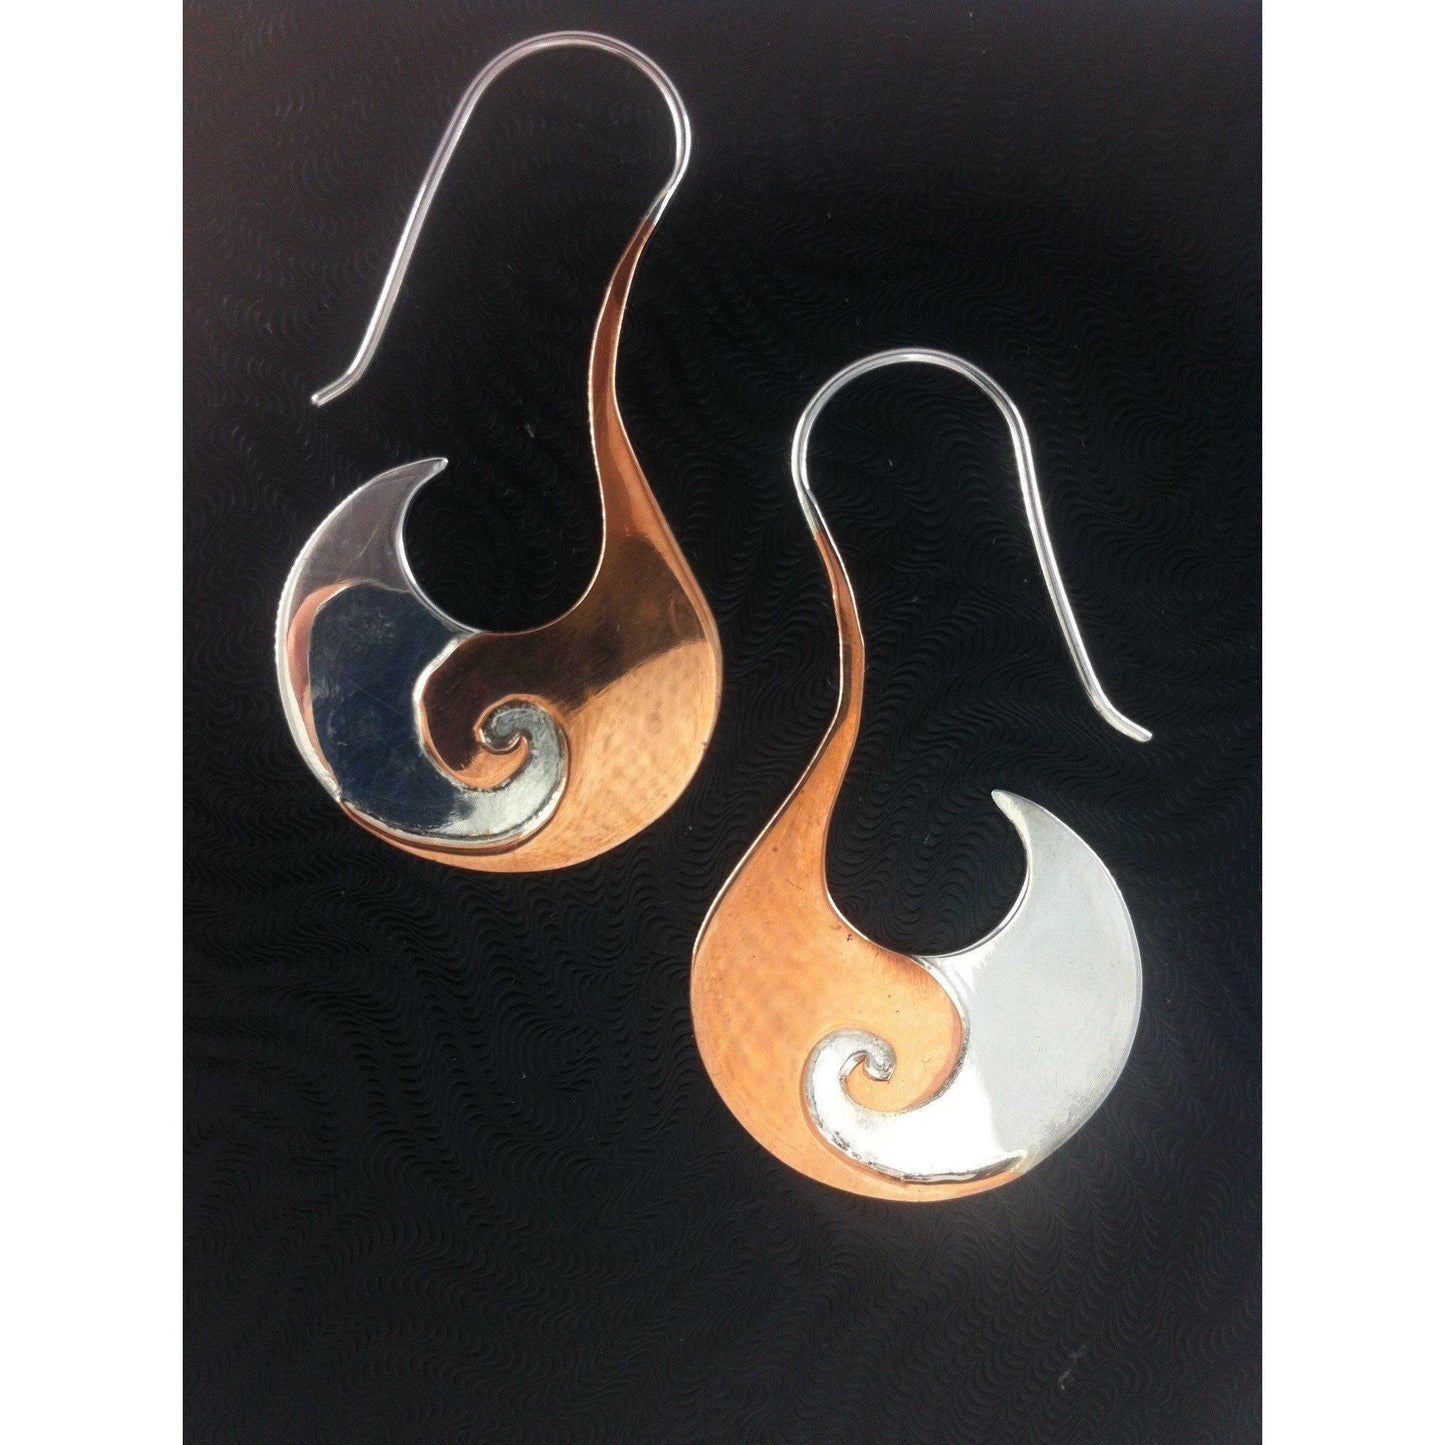 Tribal Earrings :|: Balance. sterling silver with copper highlights earrings. | Tribal Silver Earrings